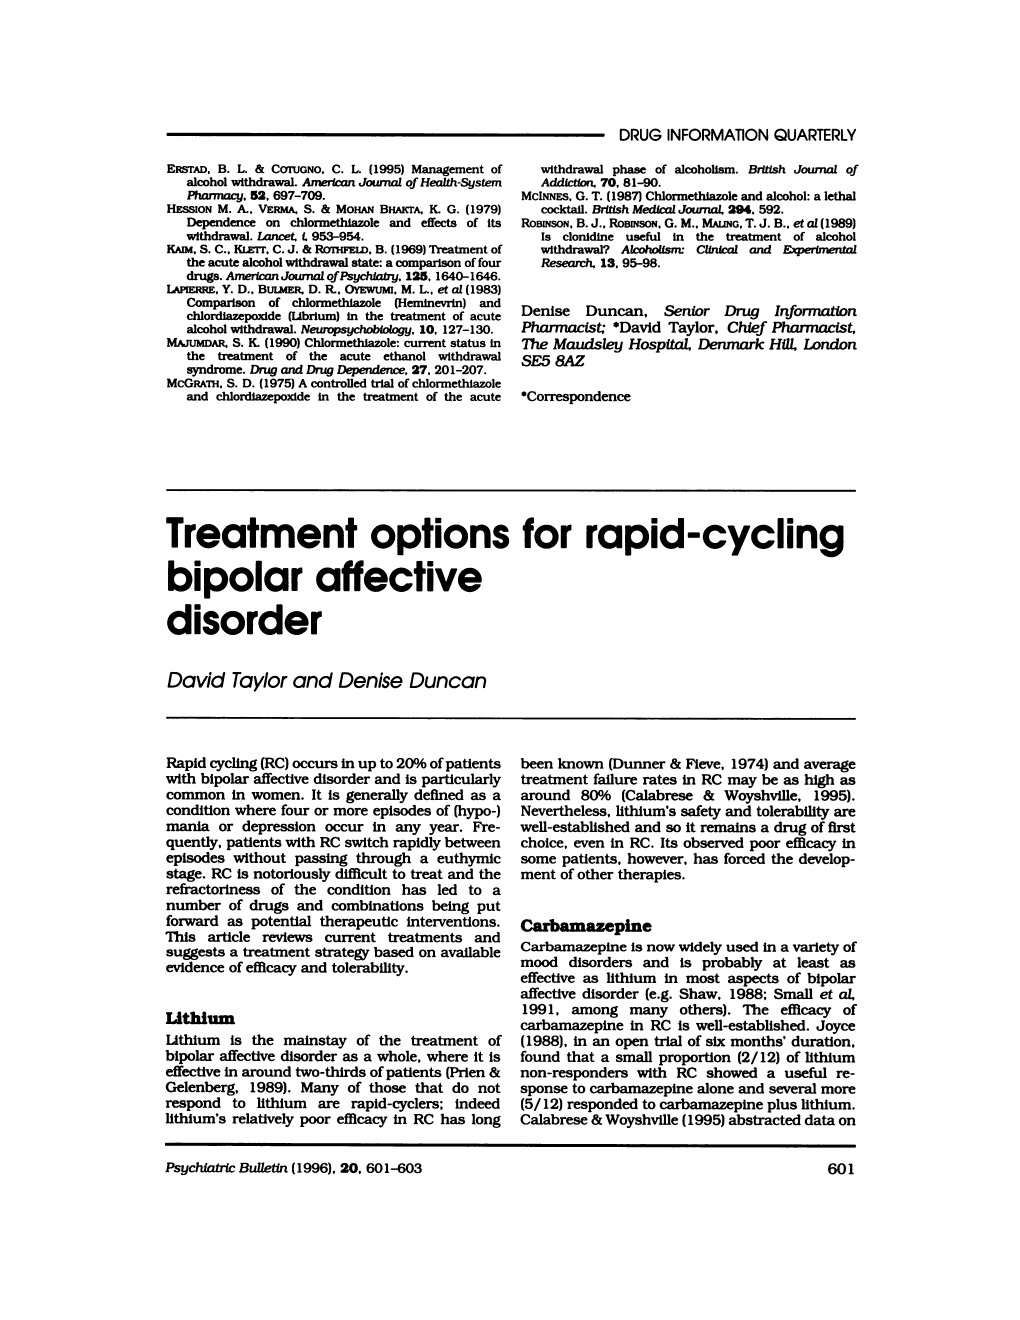 Treatment Options for Rapid-Cycling Bipolar Affective Disorder